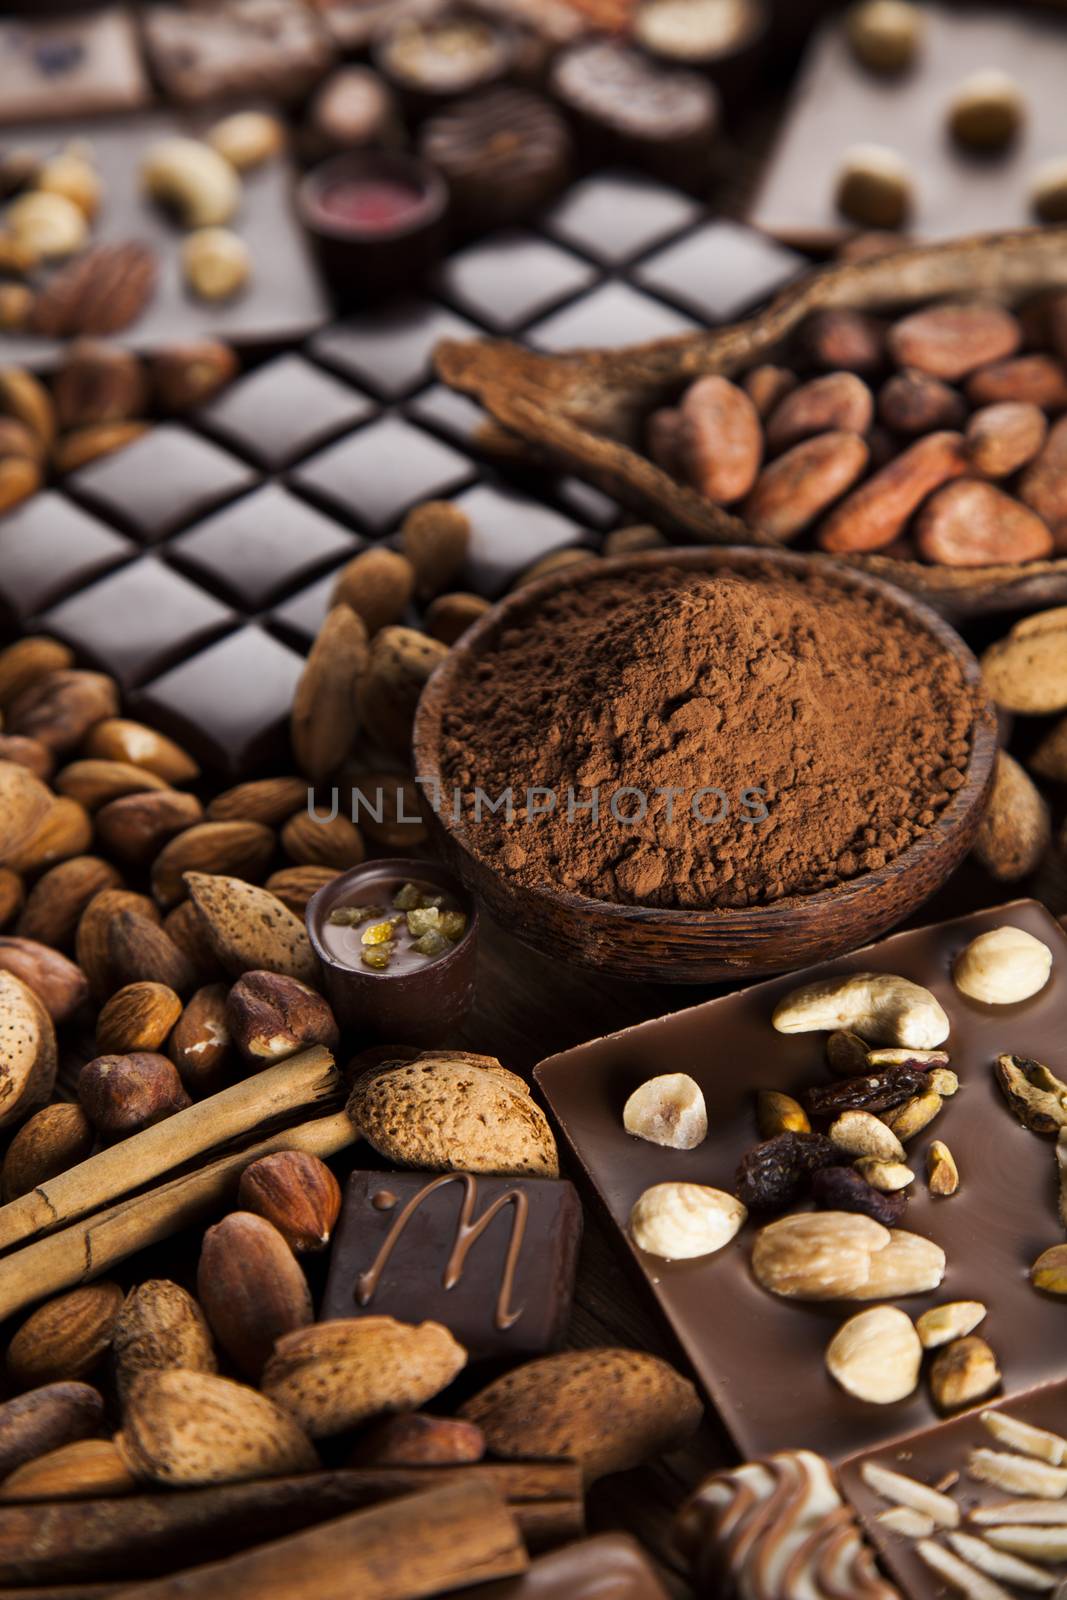 Chocolate sweet, cocoa and food dessert background